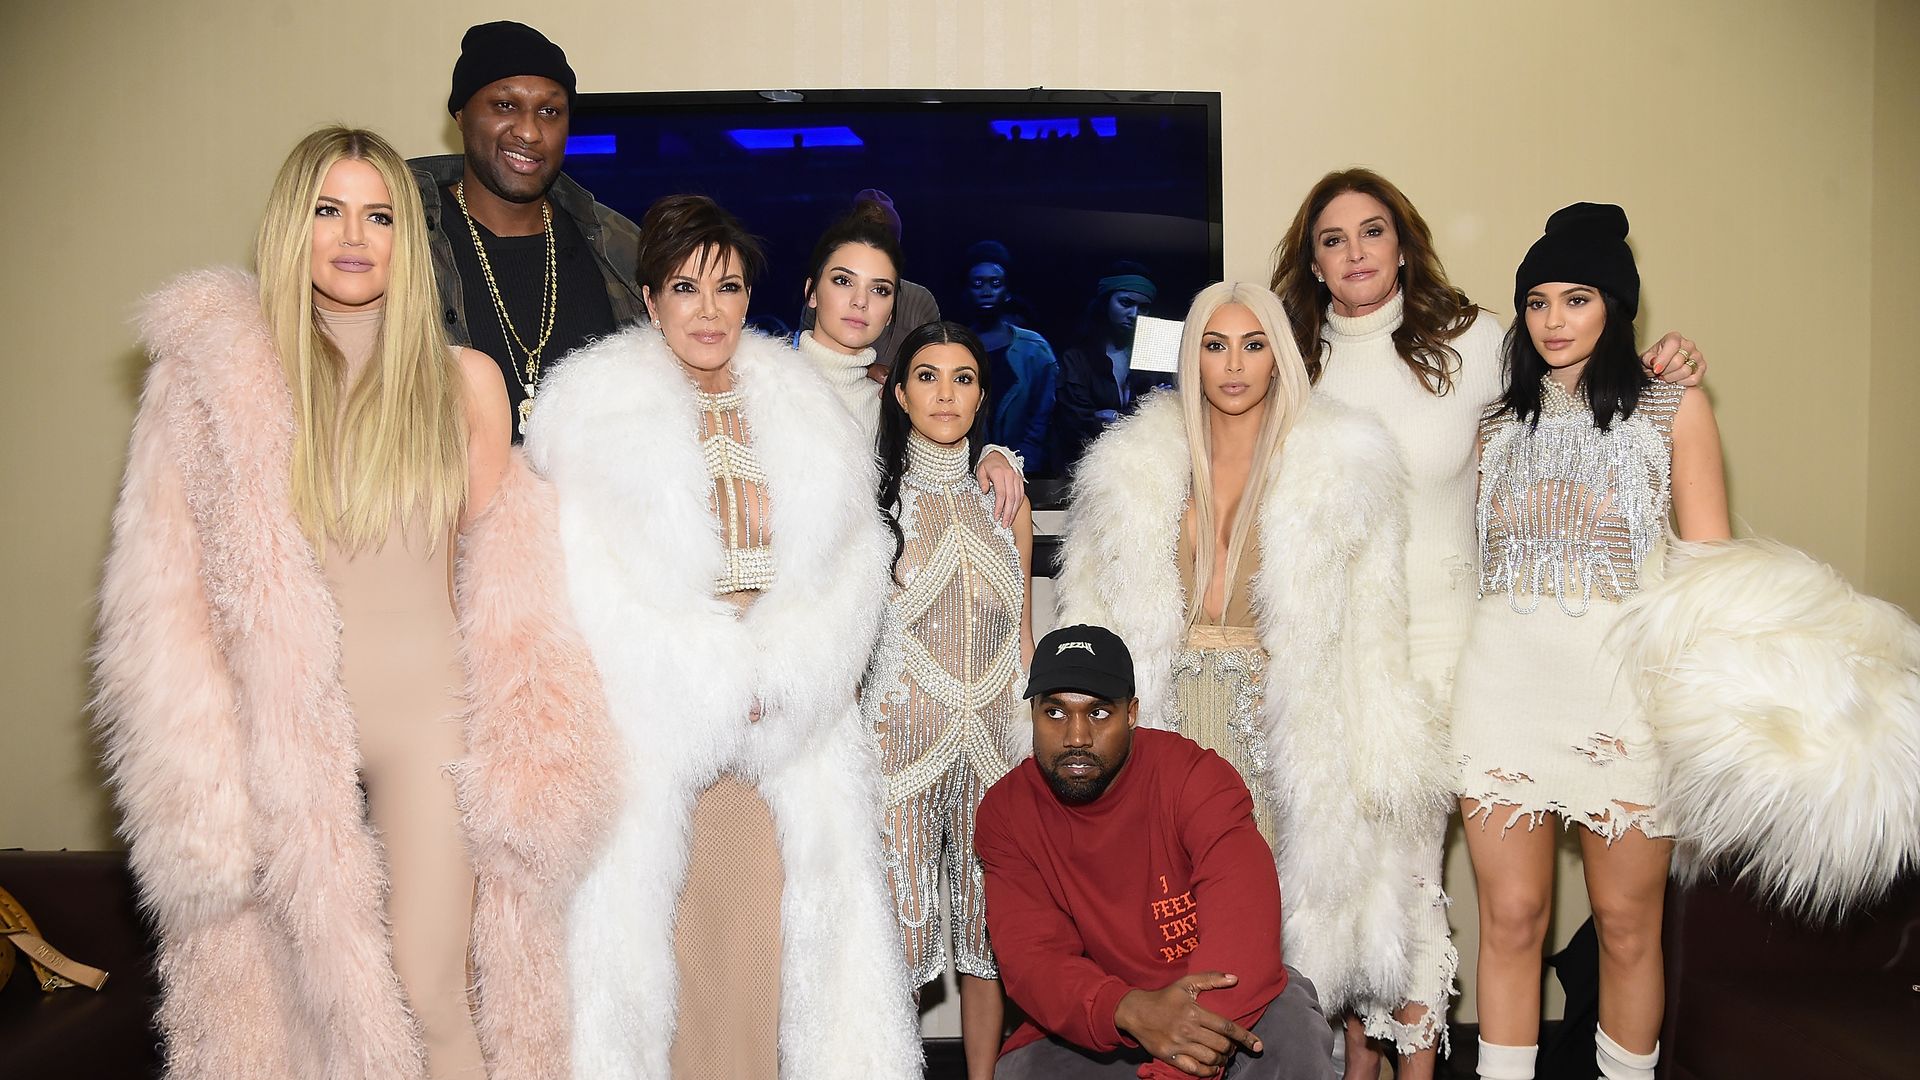 The Kardashian extended stood together for a photo, including Kanye West and Lamae Odom